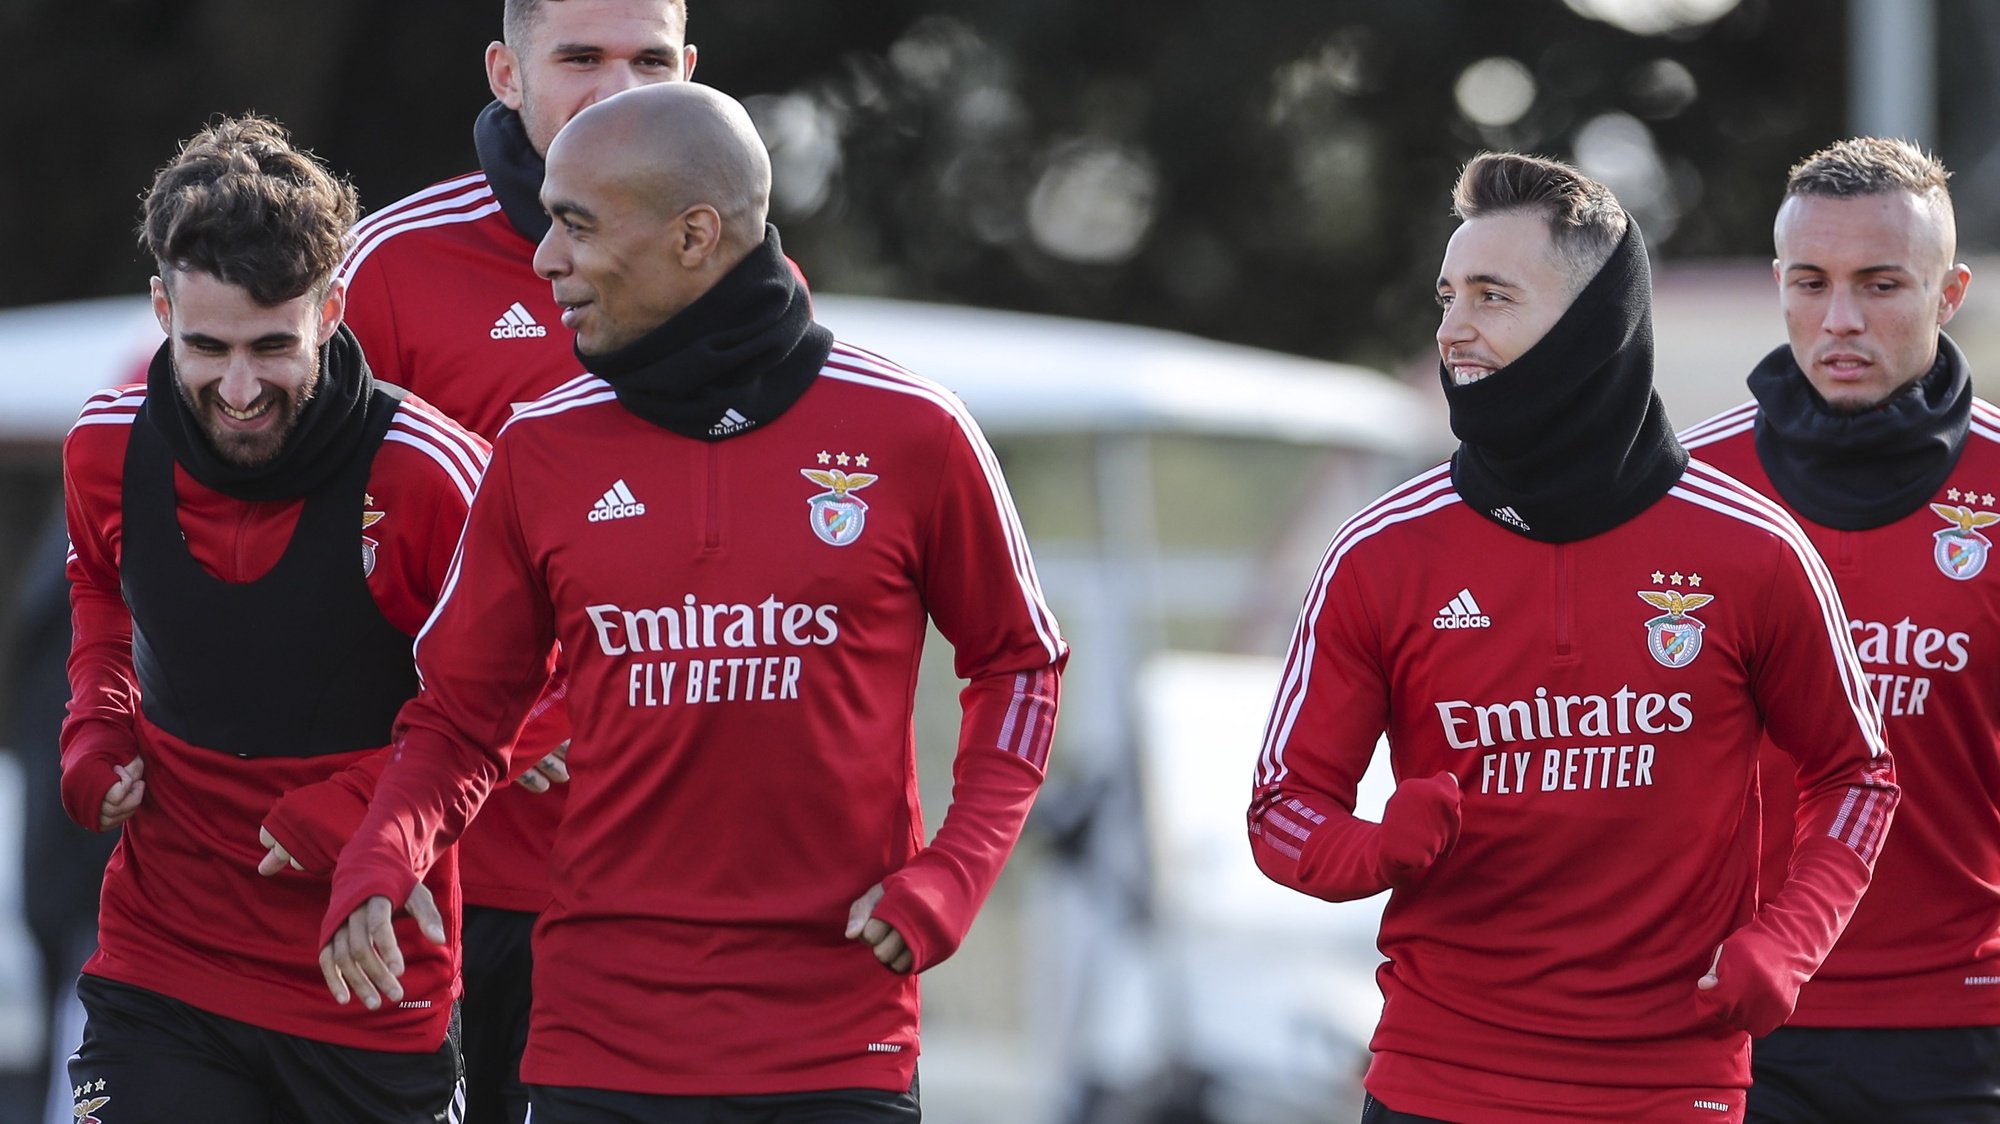 Benfica&#039;s players (L-R), Rafa Silva, Francisco Morato, Joao Mario, Alex Grimaldo, and Everton Soares in action during a training session at Benfica Campus in Seixal, outskirts of Lisbon, Portugal, 22 November 2021. Benfica will face Barcelona in their UEFA Champions League group E soccer match on 23 November 2021. MIGUEL A. LOPES/LUSA